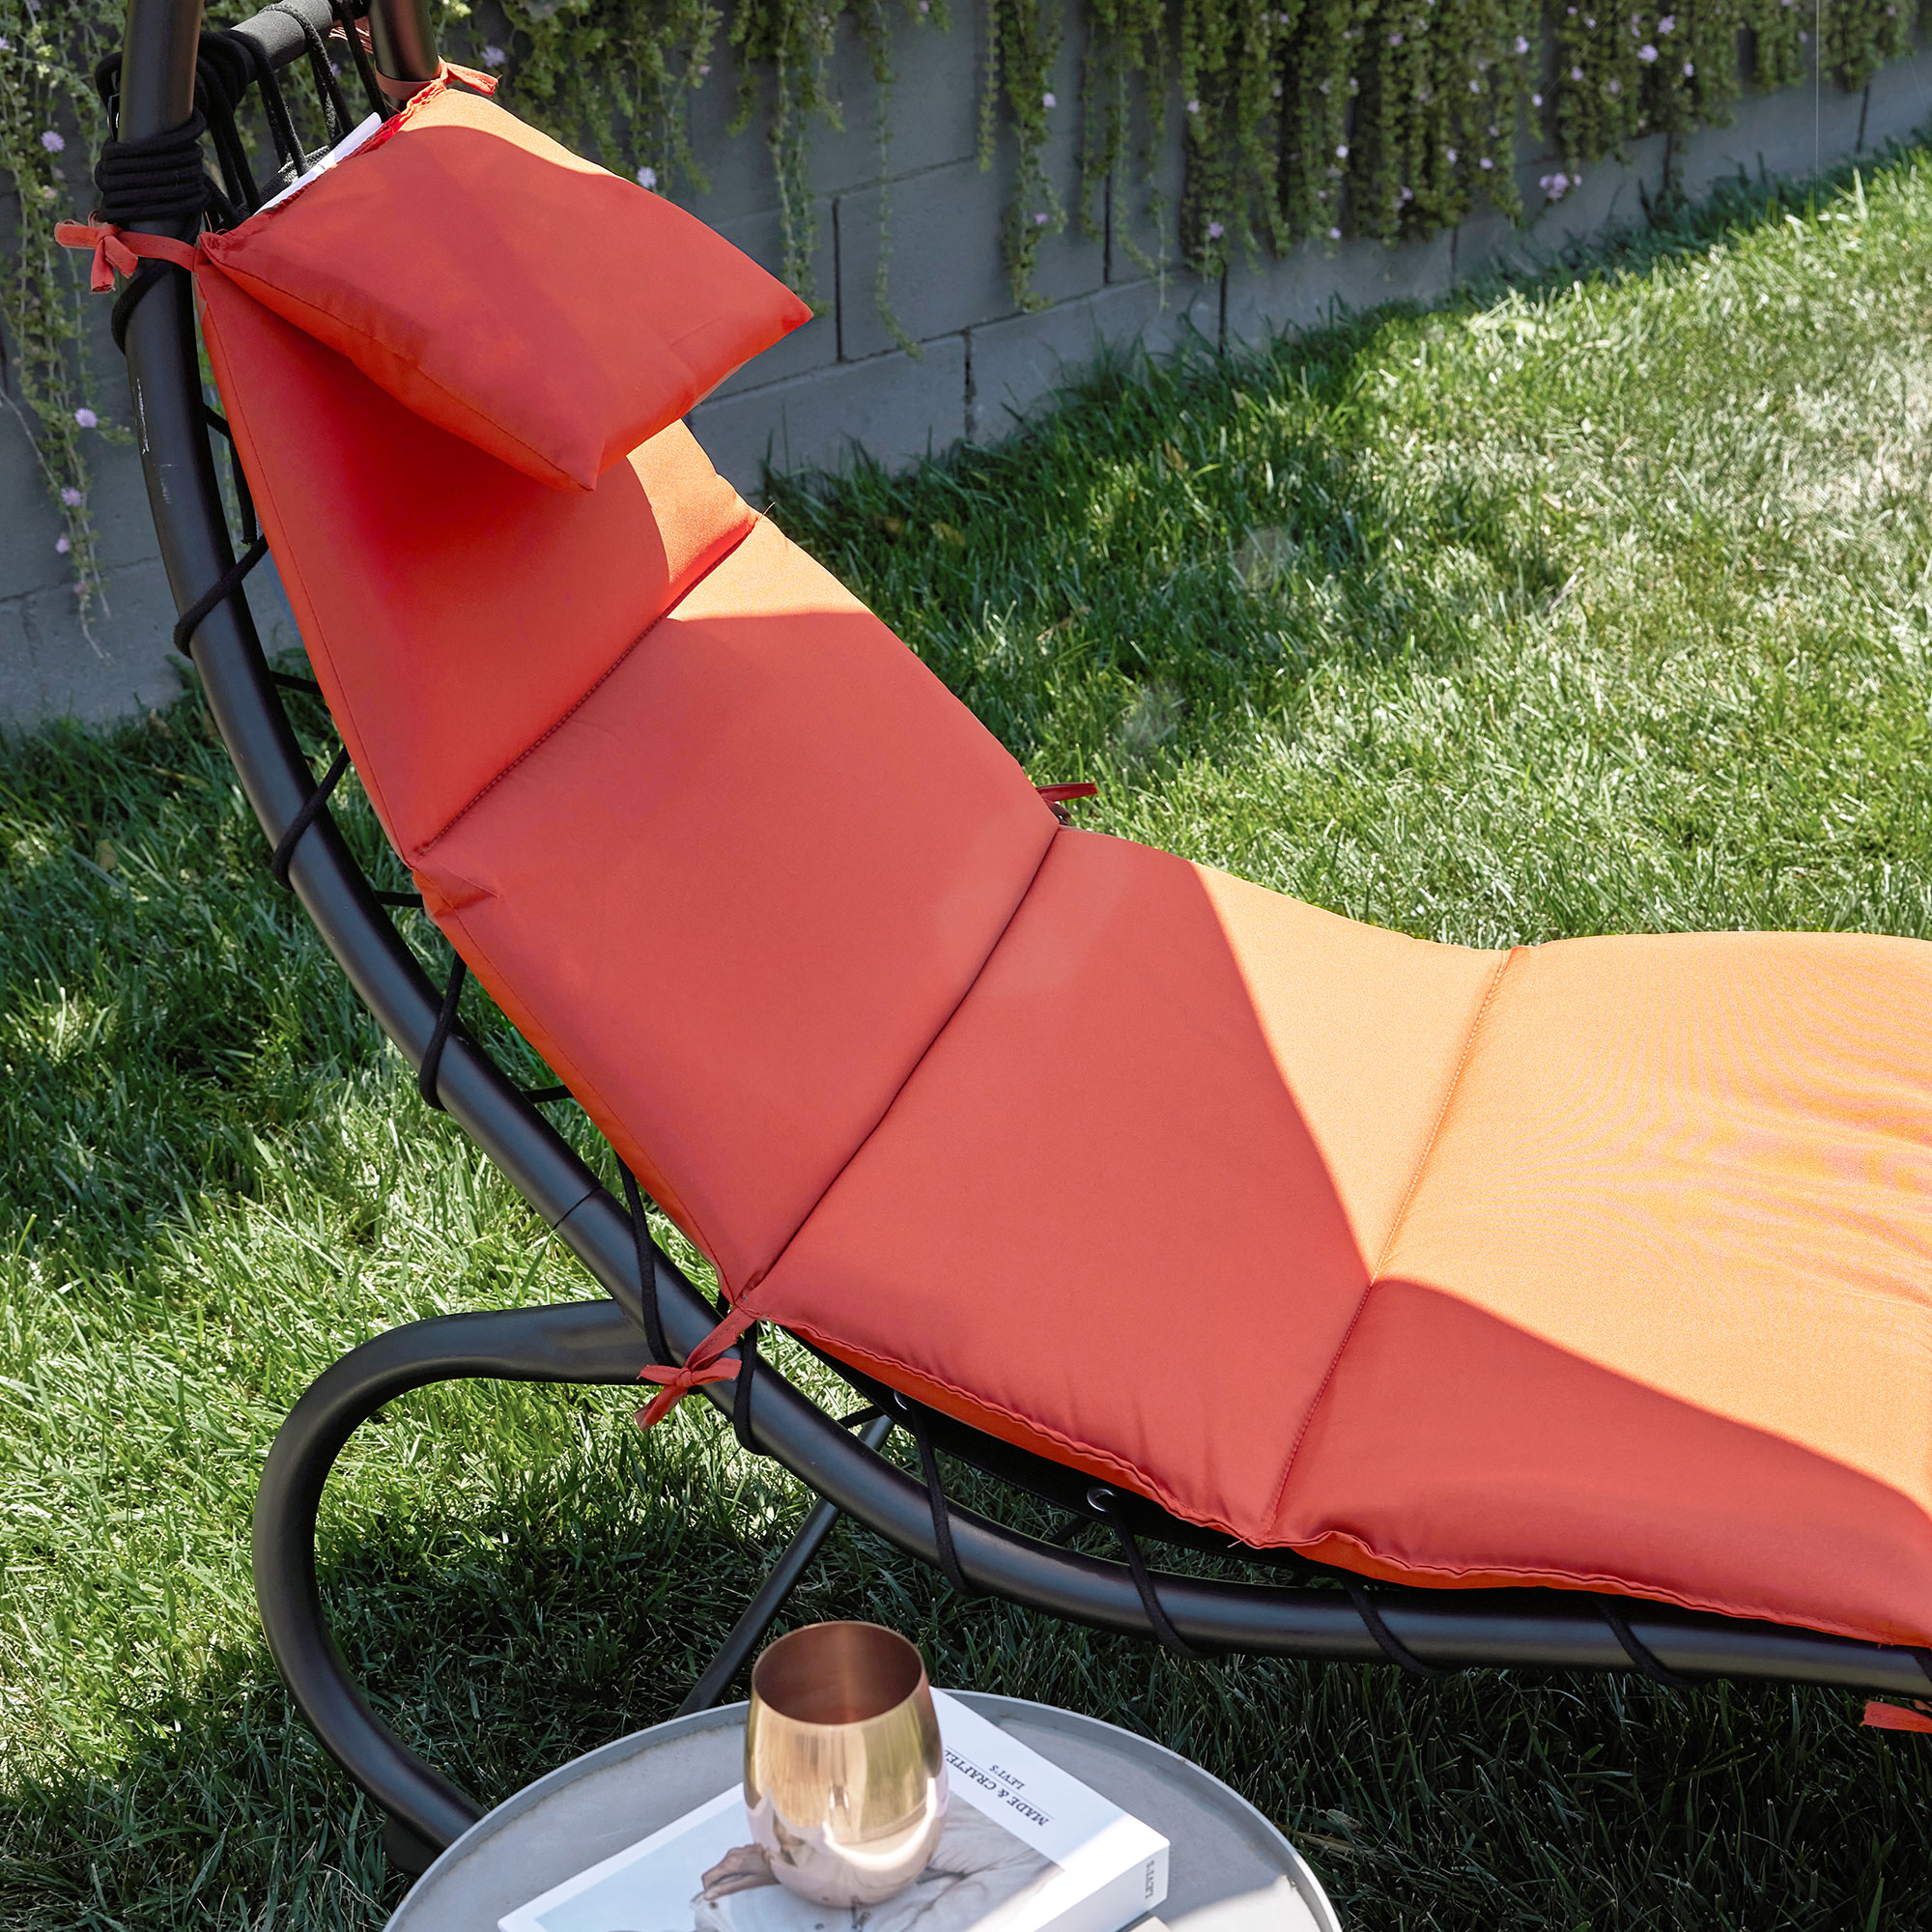 BELLEZE Outdoor Hanging Chaise Lounge Chair Swing Curved Cushion Seat Hammock With Canopy Sun Shade, Orange - image 2 of 4